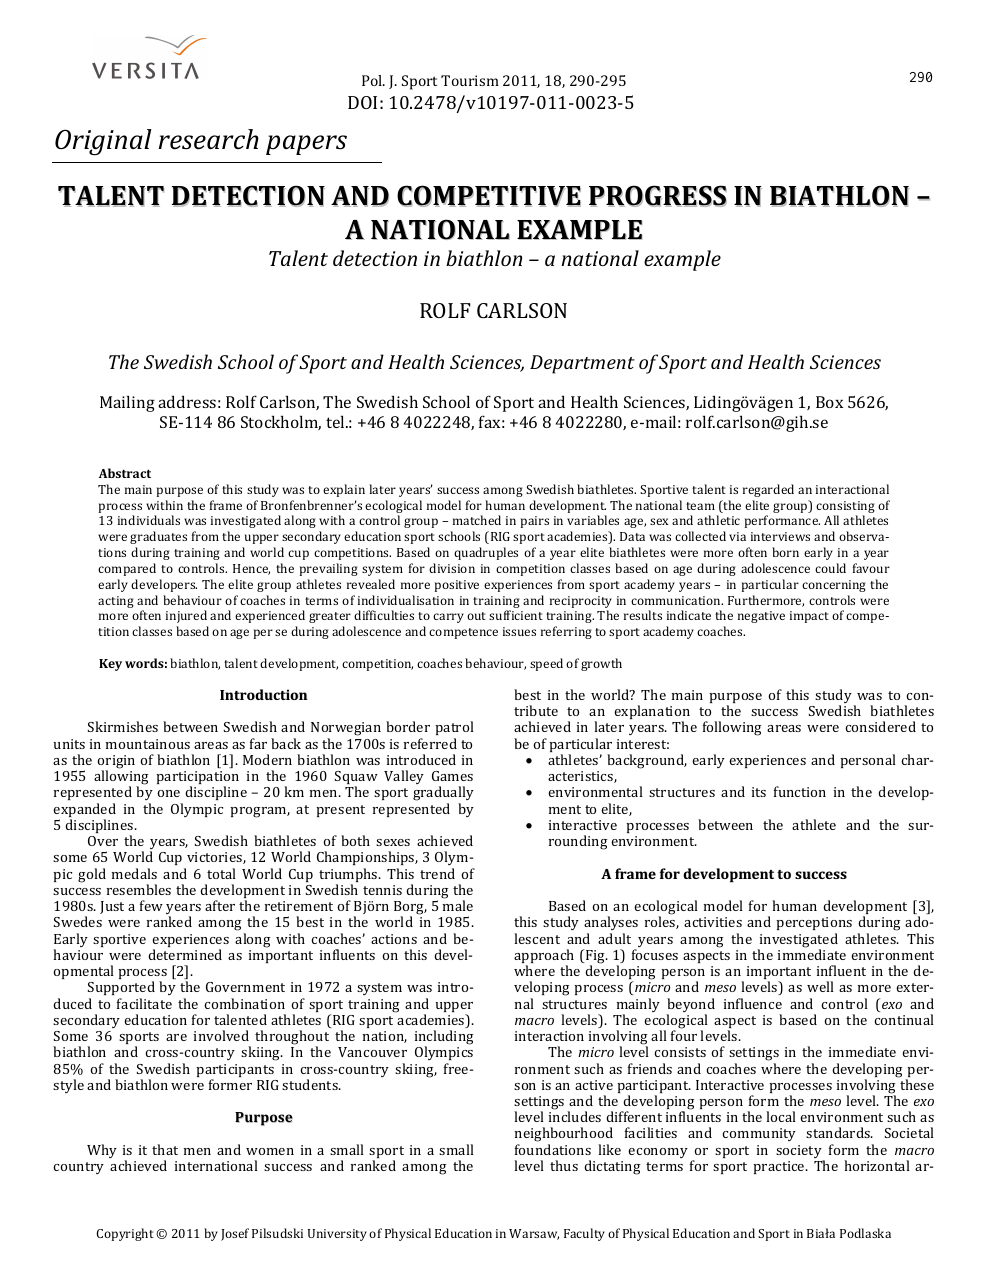 Talent Detection and Progress in Biathlon A National Example – topic of research paper in Health sciences. Download article PDF and read for free on CyberLeninka open science hub.